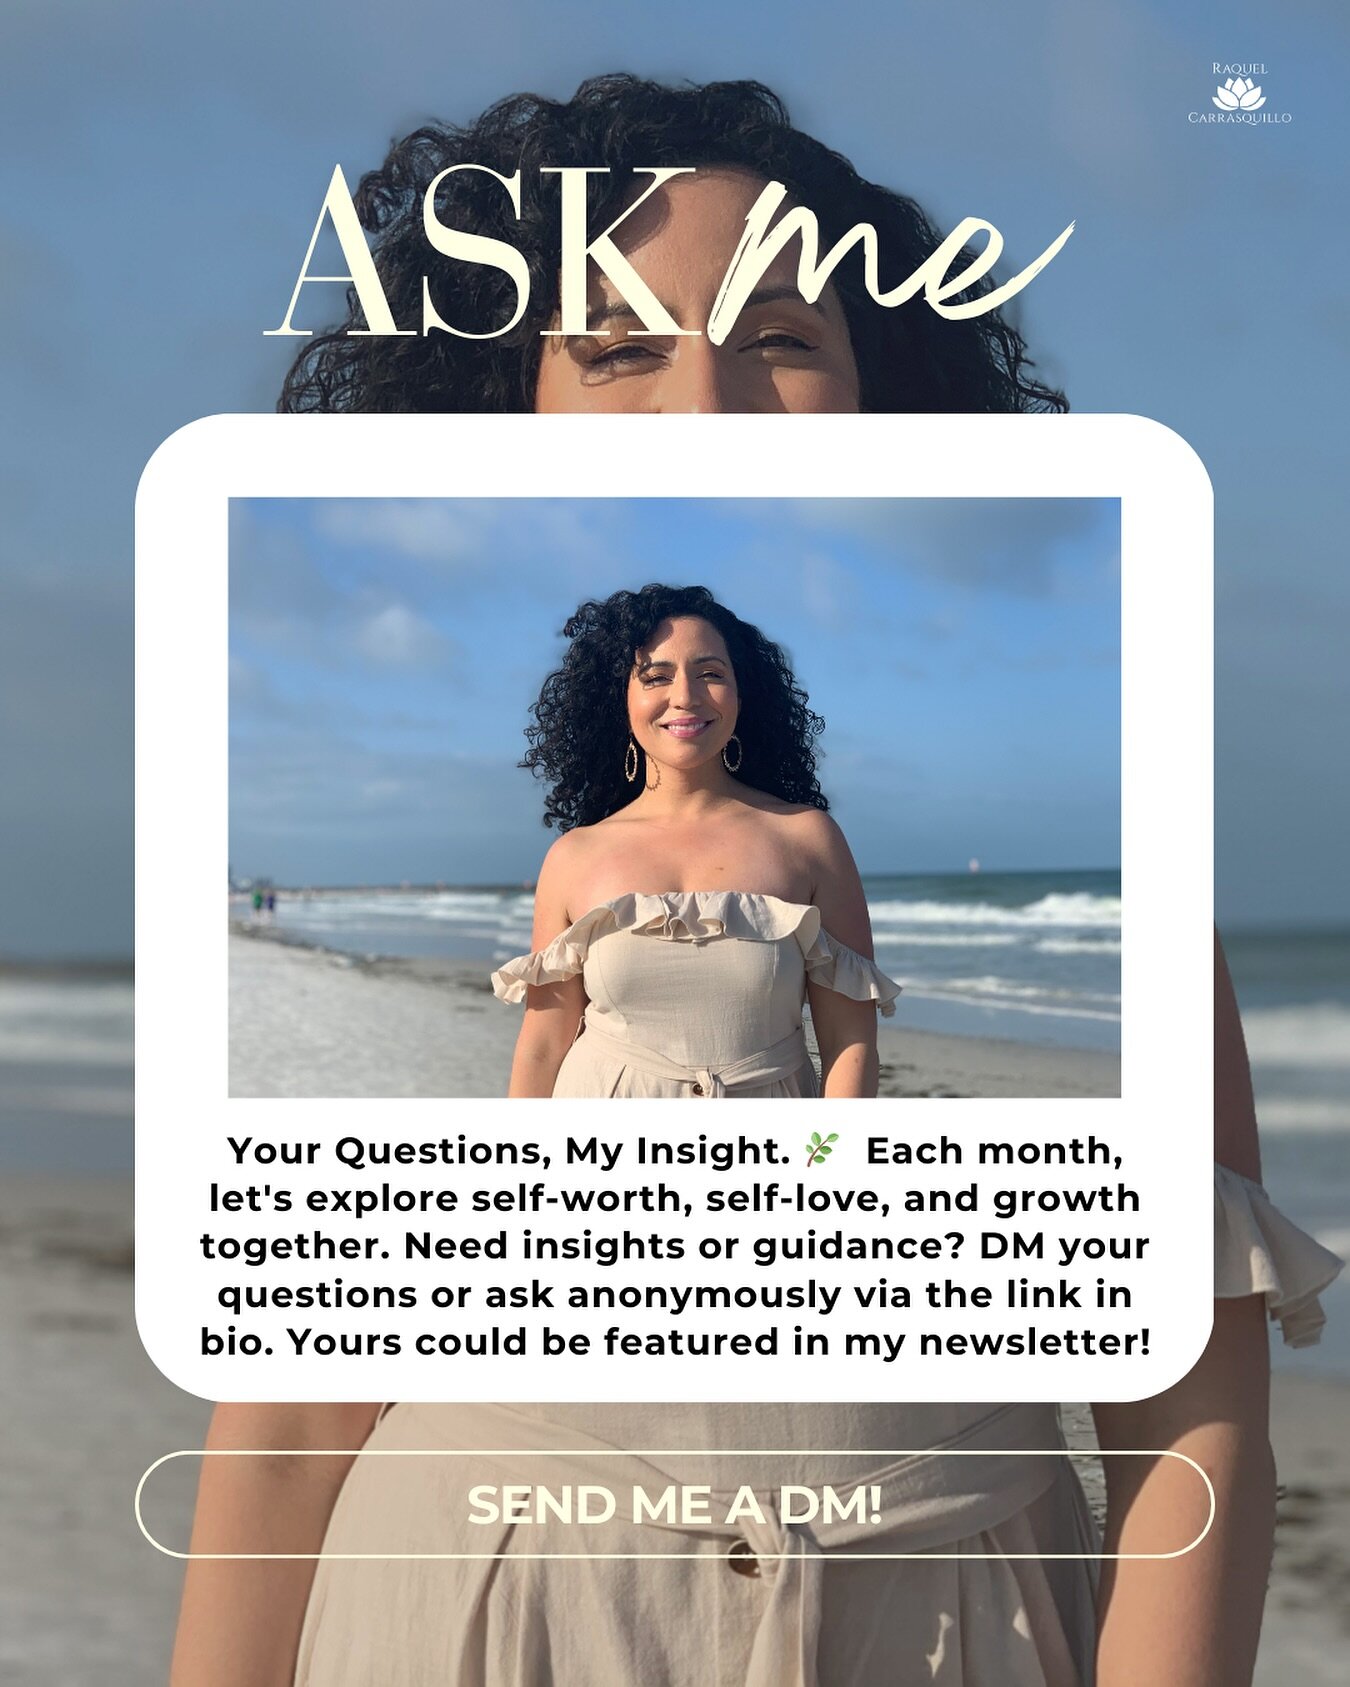 In the spirit of connection and growth, I&rsquo;m carving out space each month to dive deep into what matters most to you - be it self-worth, self-love, personal development, or any hurdles you&rsquo;re facing on your journey to achieving your goals.